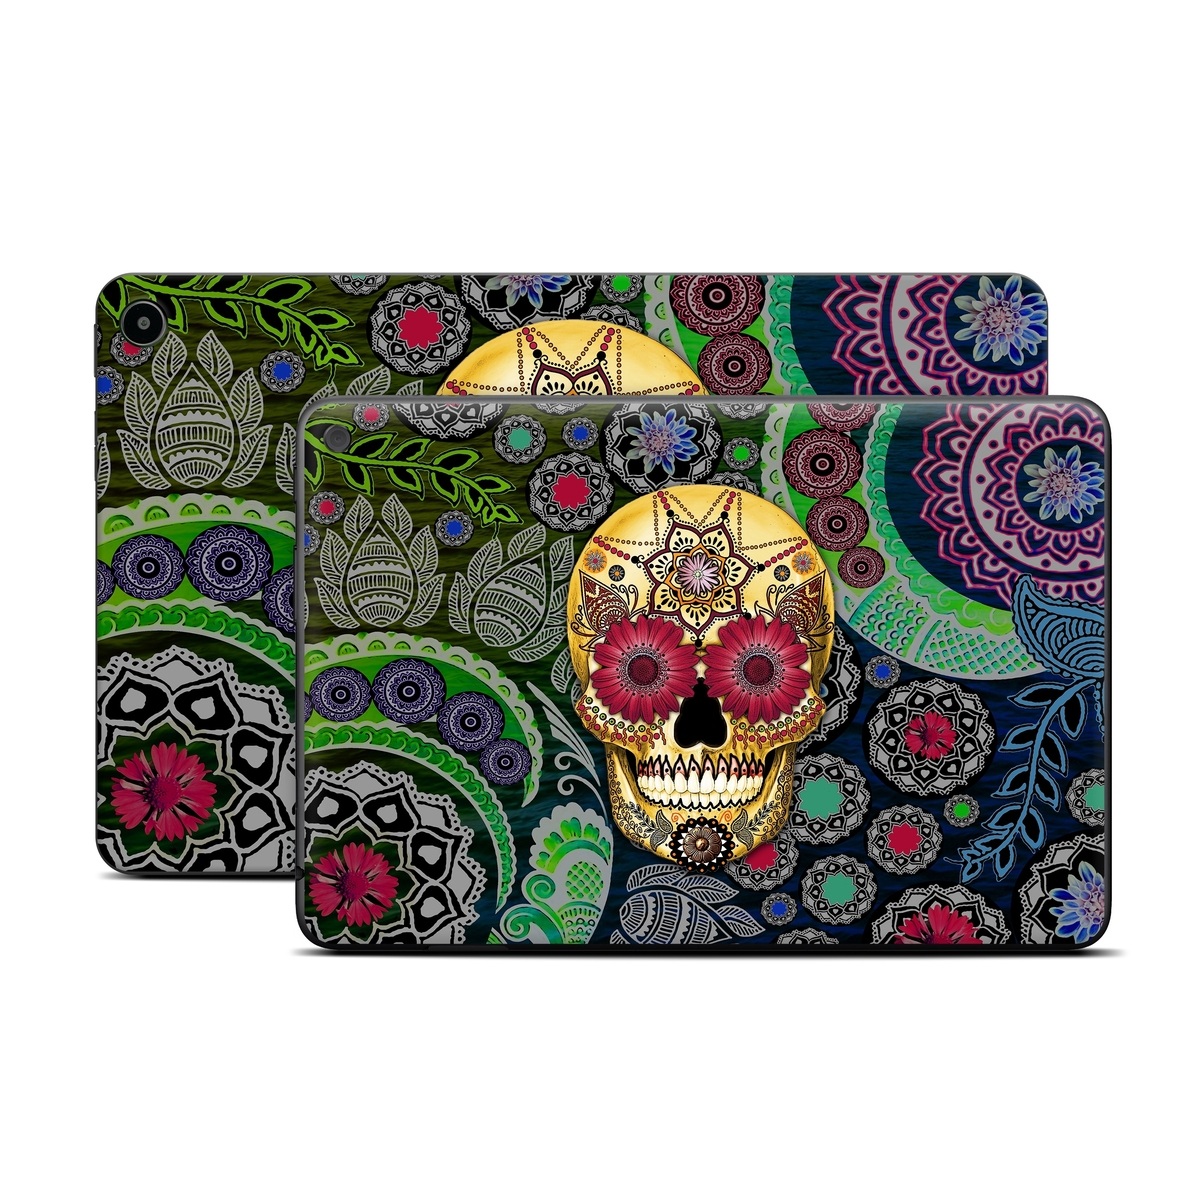 Amazon Fire Tablet Series Skin Skin design of Skull, Bone, Pattern, Psychedelic art, Visual arts, Design, Illustration, Art, Textile, Plant, with black, red, gray, green, blue colors